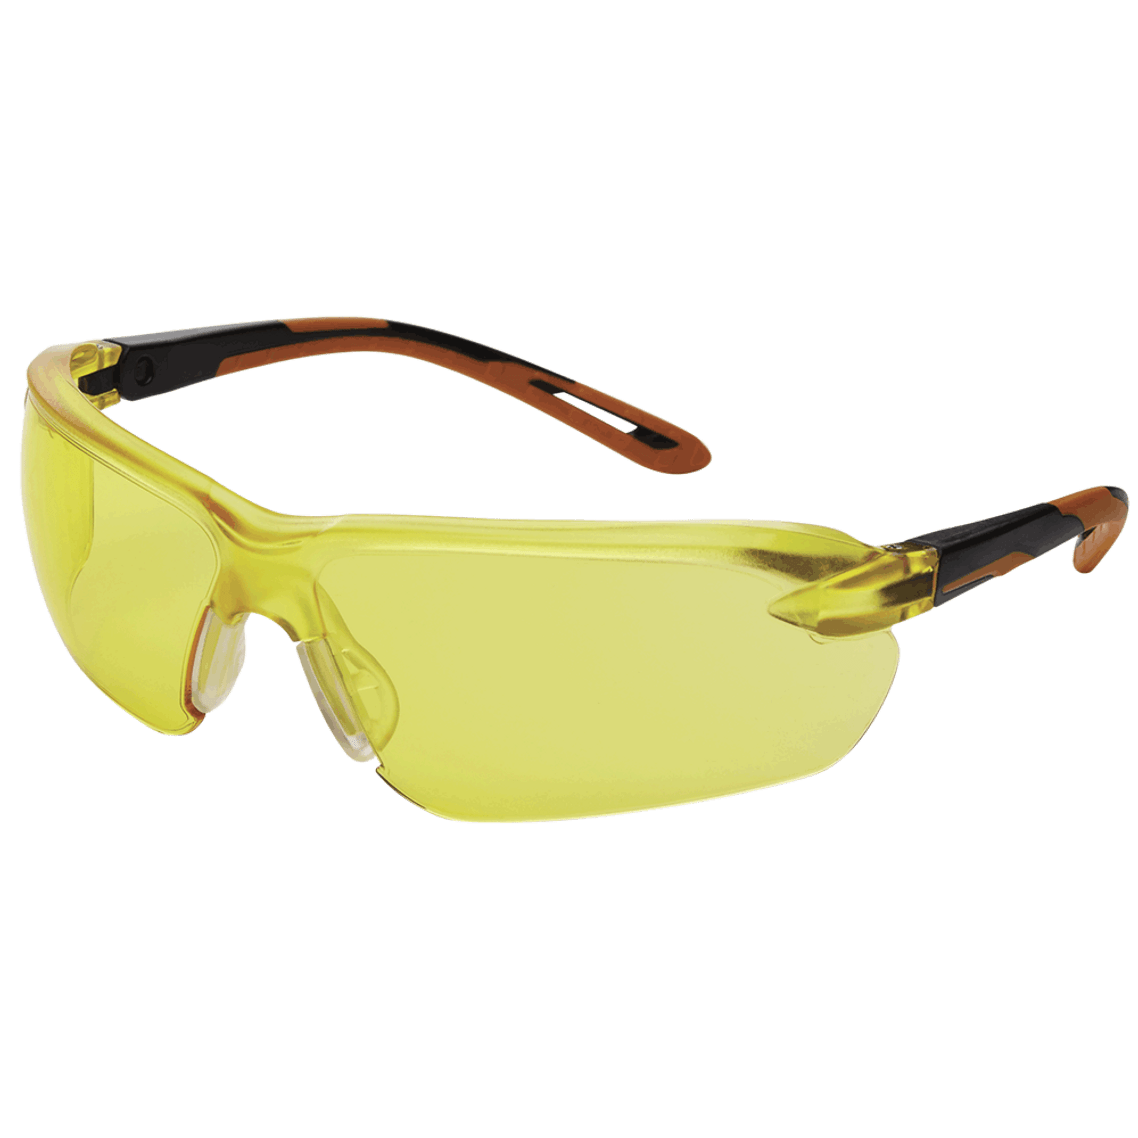 Sellstorm XM310 Safety Glasses - Amber Tint (12 Pack) | Safetywear.ca